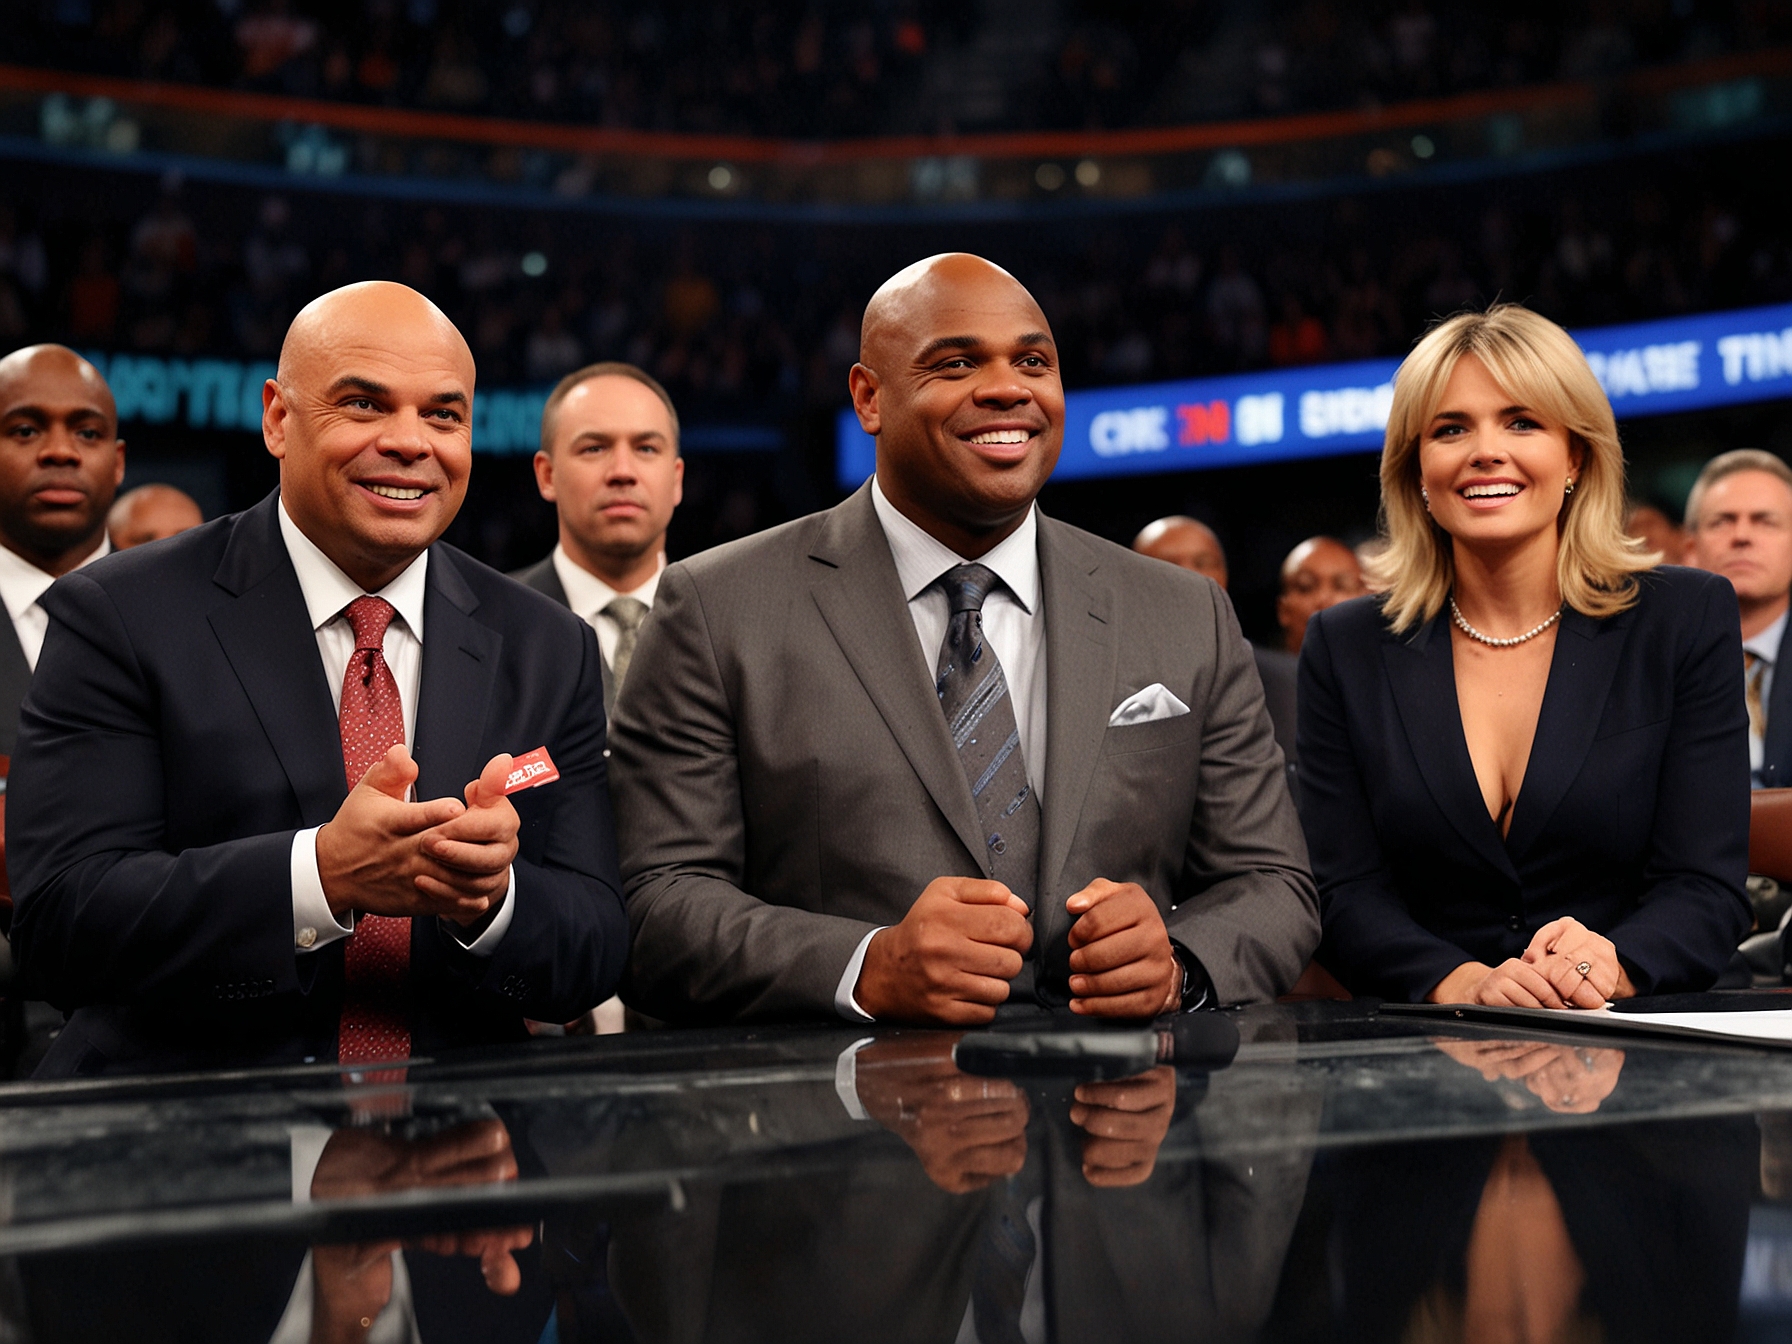 Charles Barkley delivering his final on-air commentary on TNT's 'Inside the NBA', surrounded by his co-hosts who are visibly emotional as they bid farewell to the Hall of Famer.